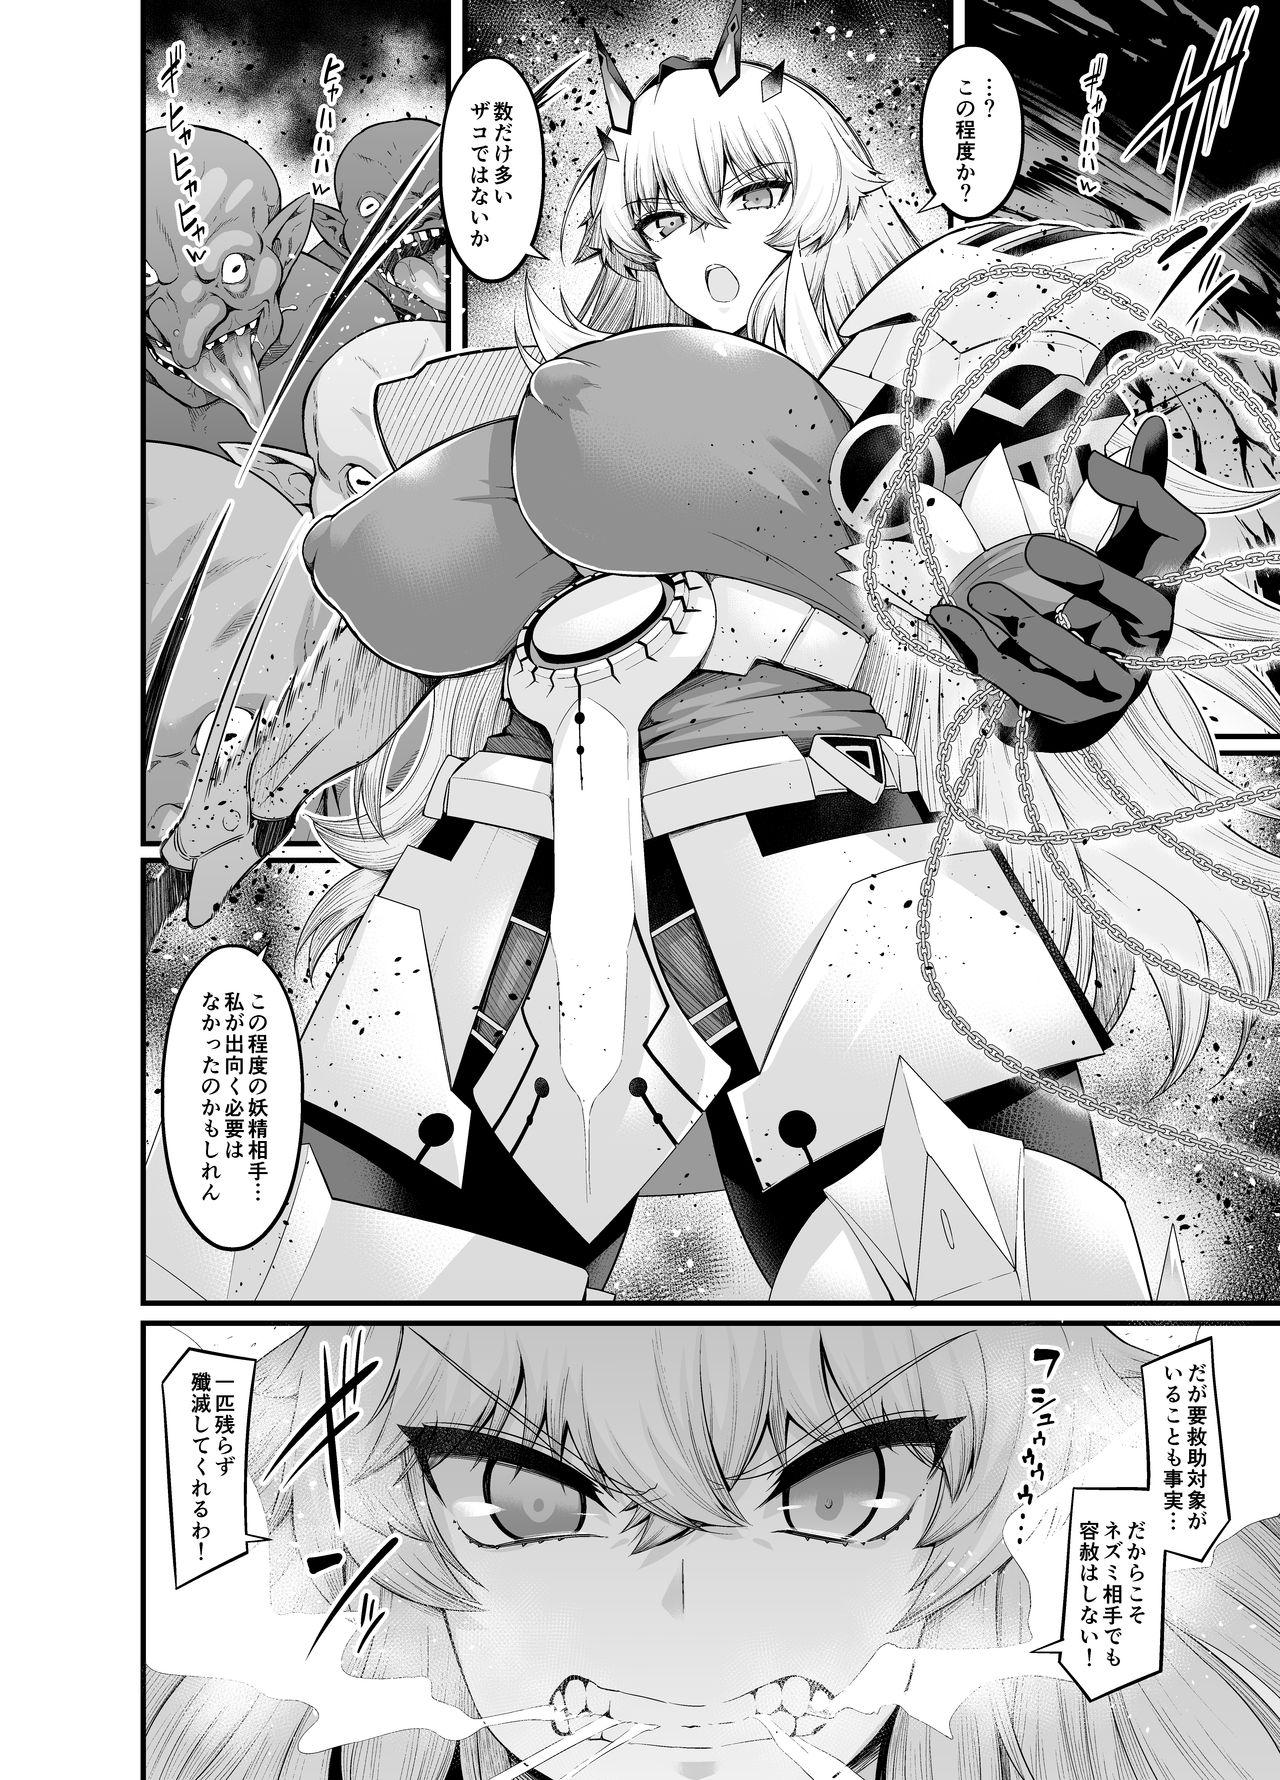 Doll Barghest vs Goblin - Fate grand order Indonesia - Page 1